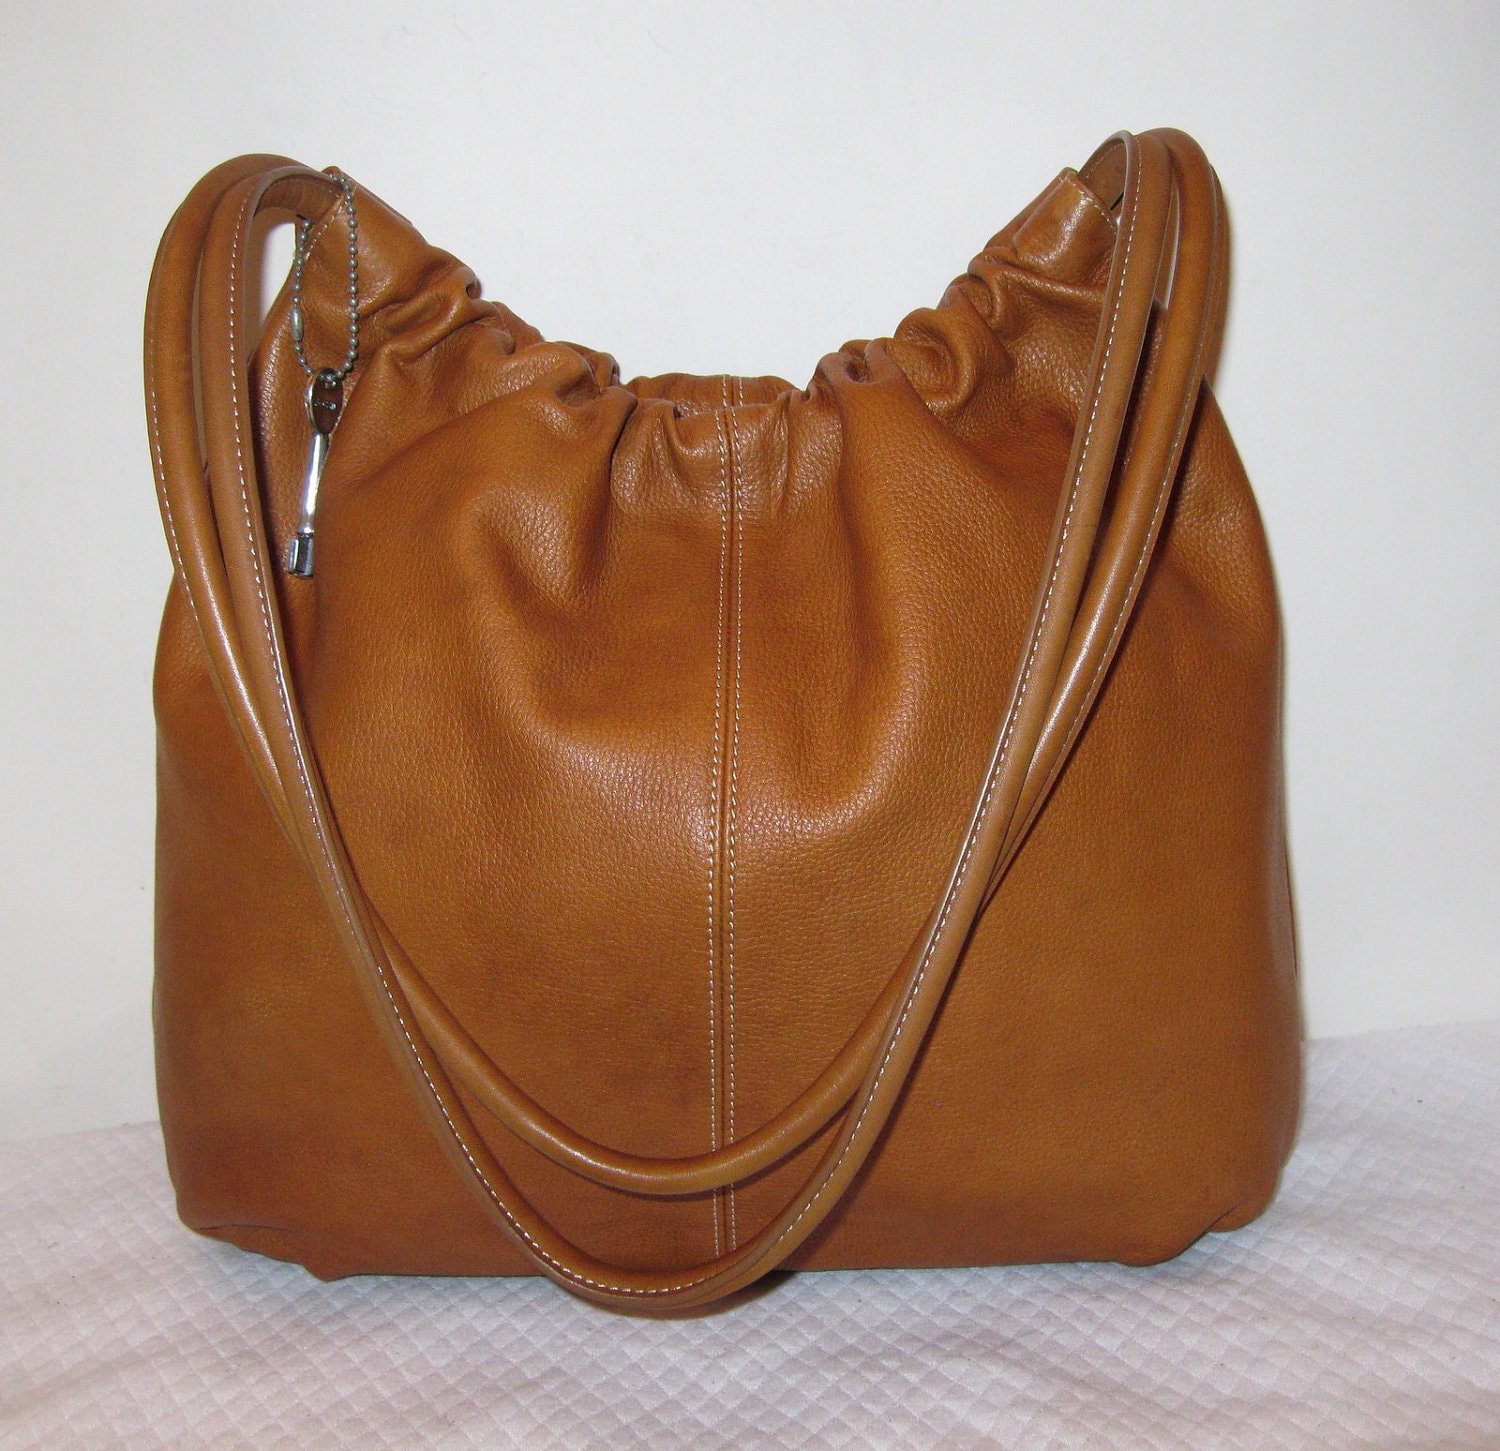 Fossil hobo purse butter soft genuine leather warm tan